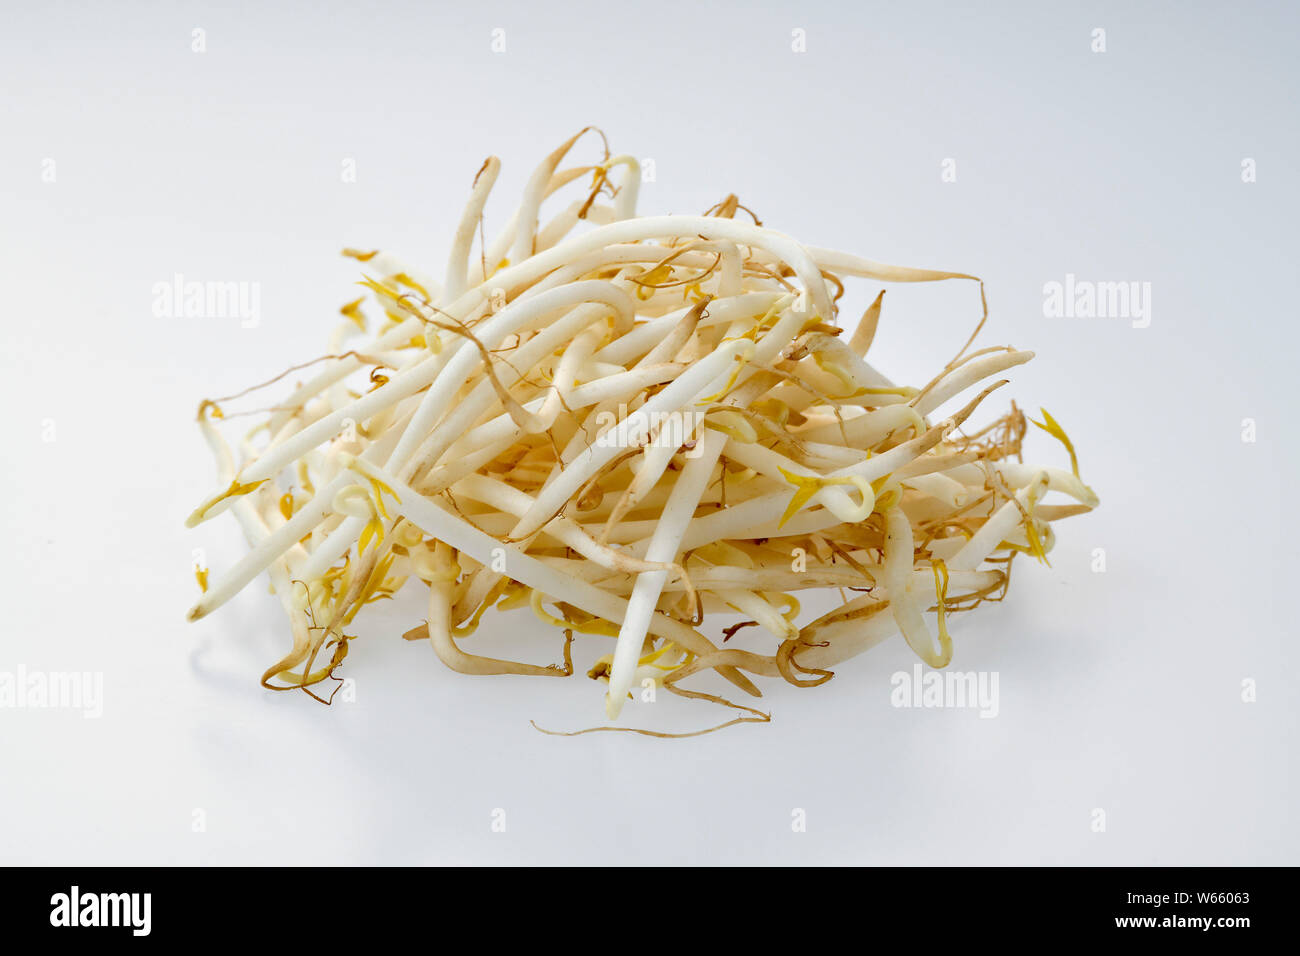 soybean sprouts Stock Photo